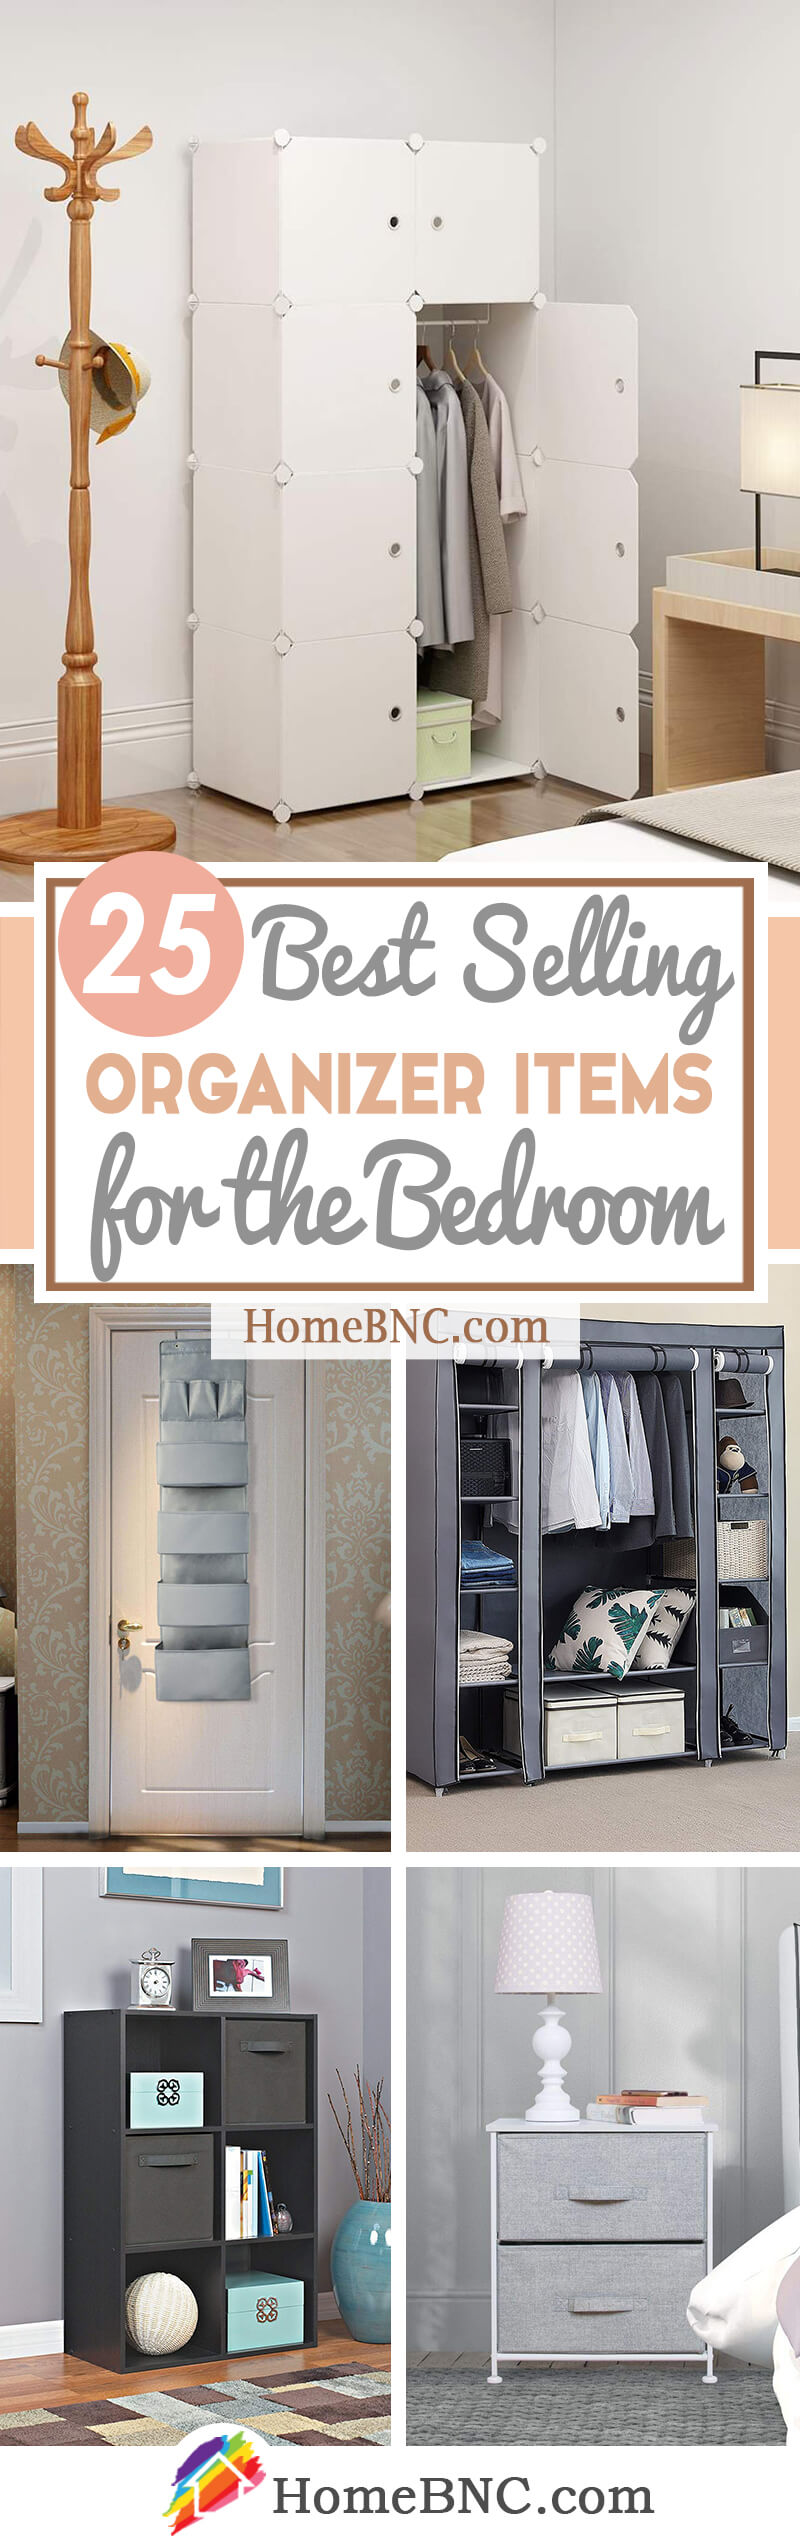 Best Selling Organizer Products for Bedroom